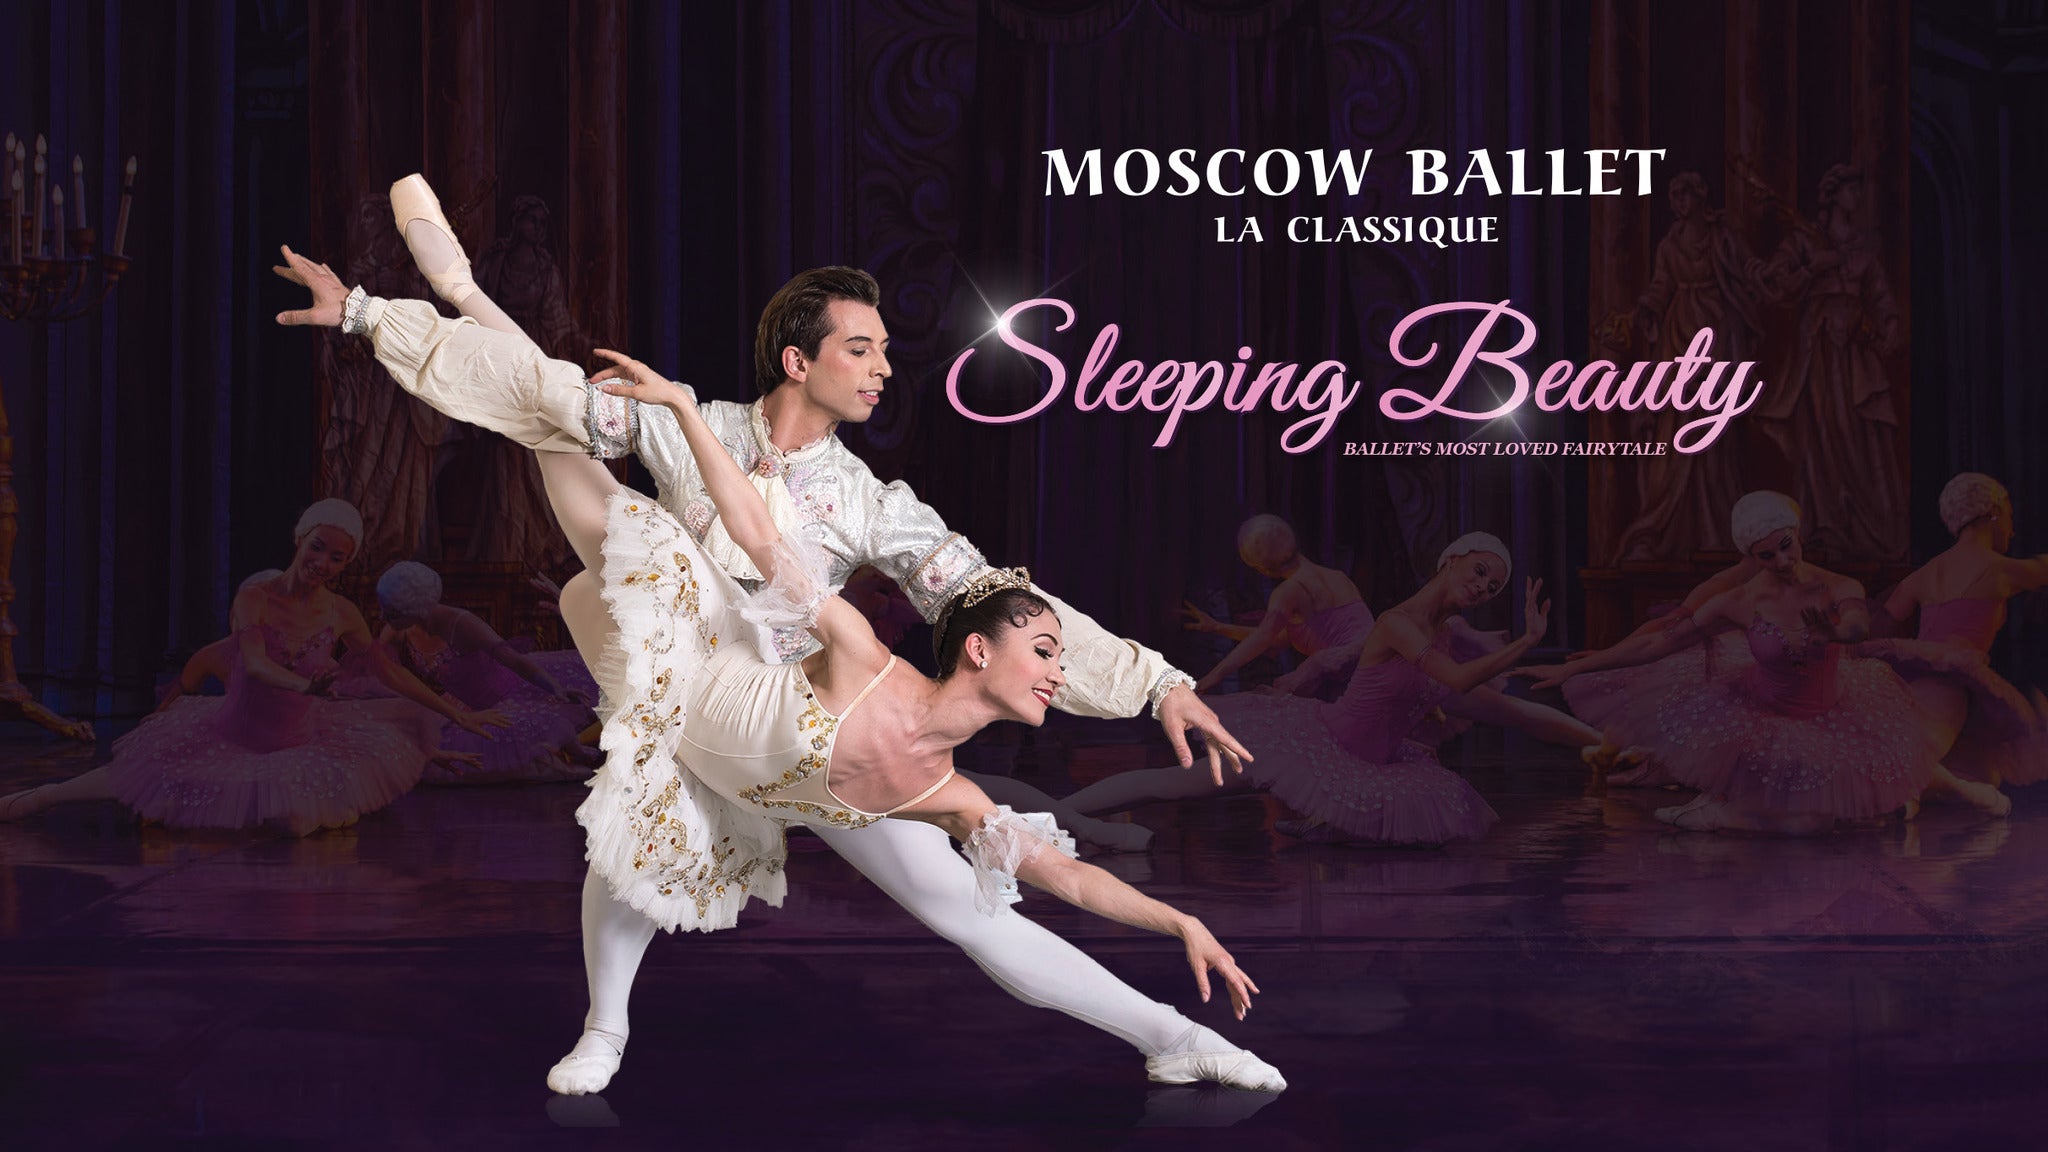 Tickets   Sleeping Beauty   Moscow Ballet La Classique   State ...